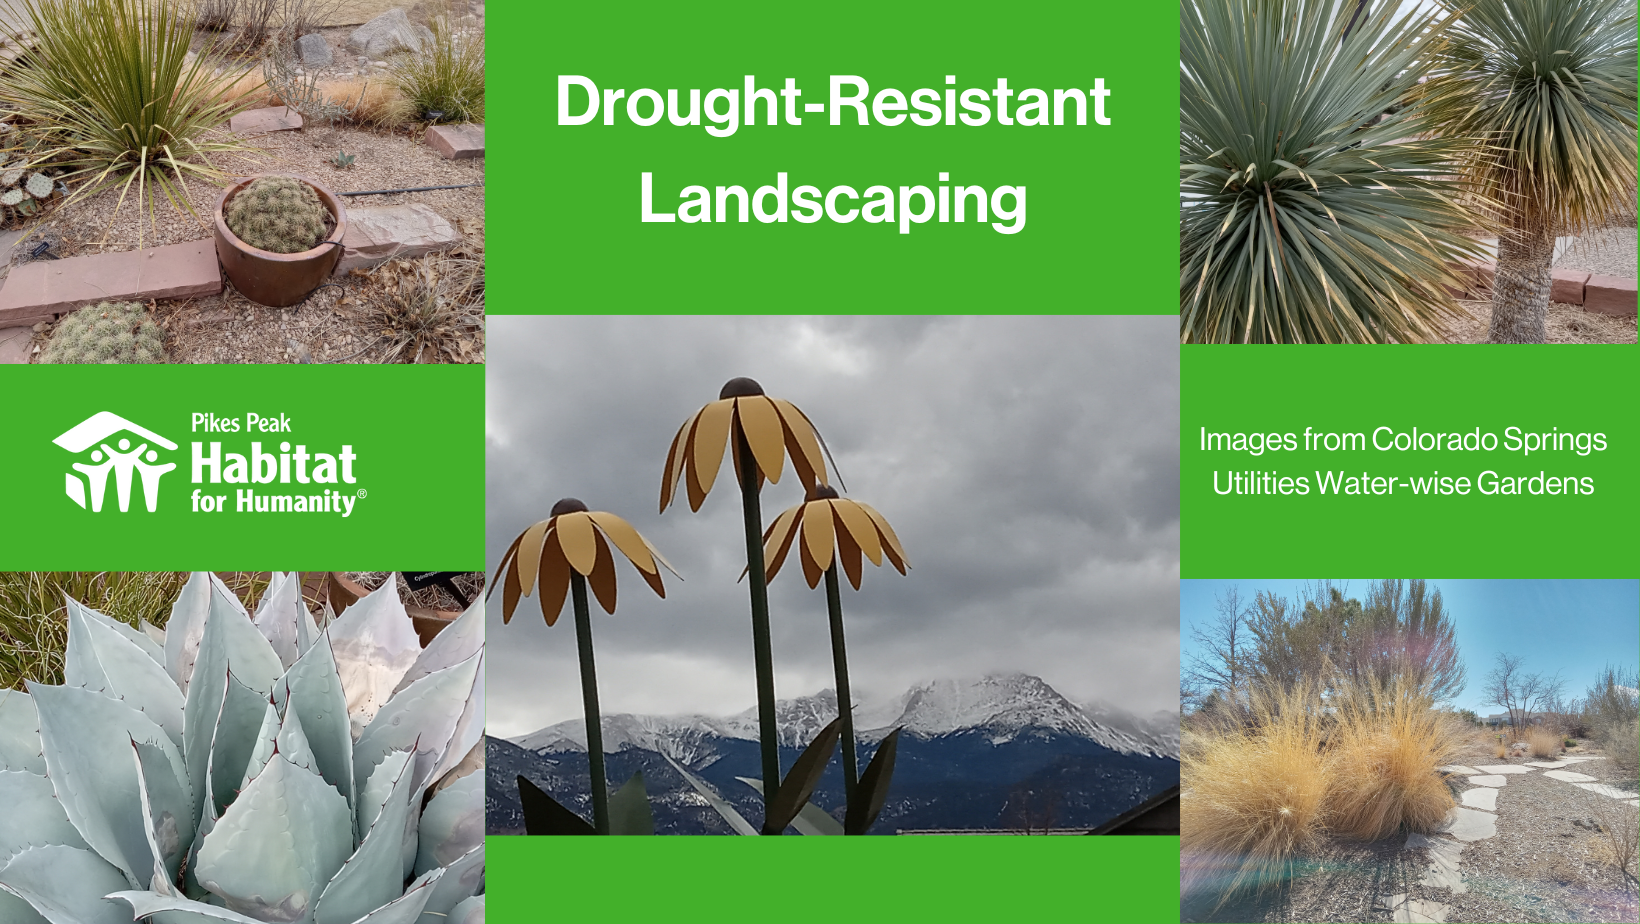 Drought-Resistant Landscaping page header with images from Colorado Springs Utilities Water-wise Gardens